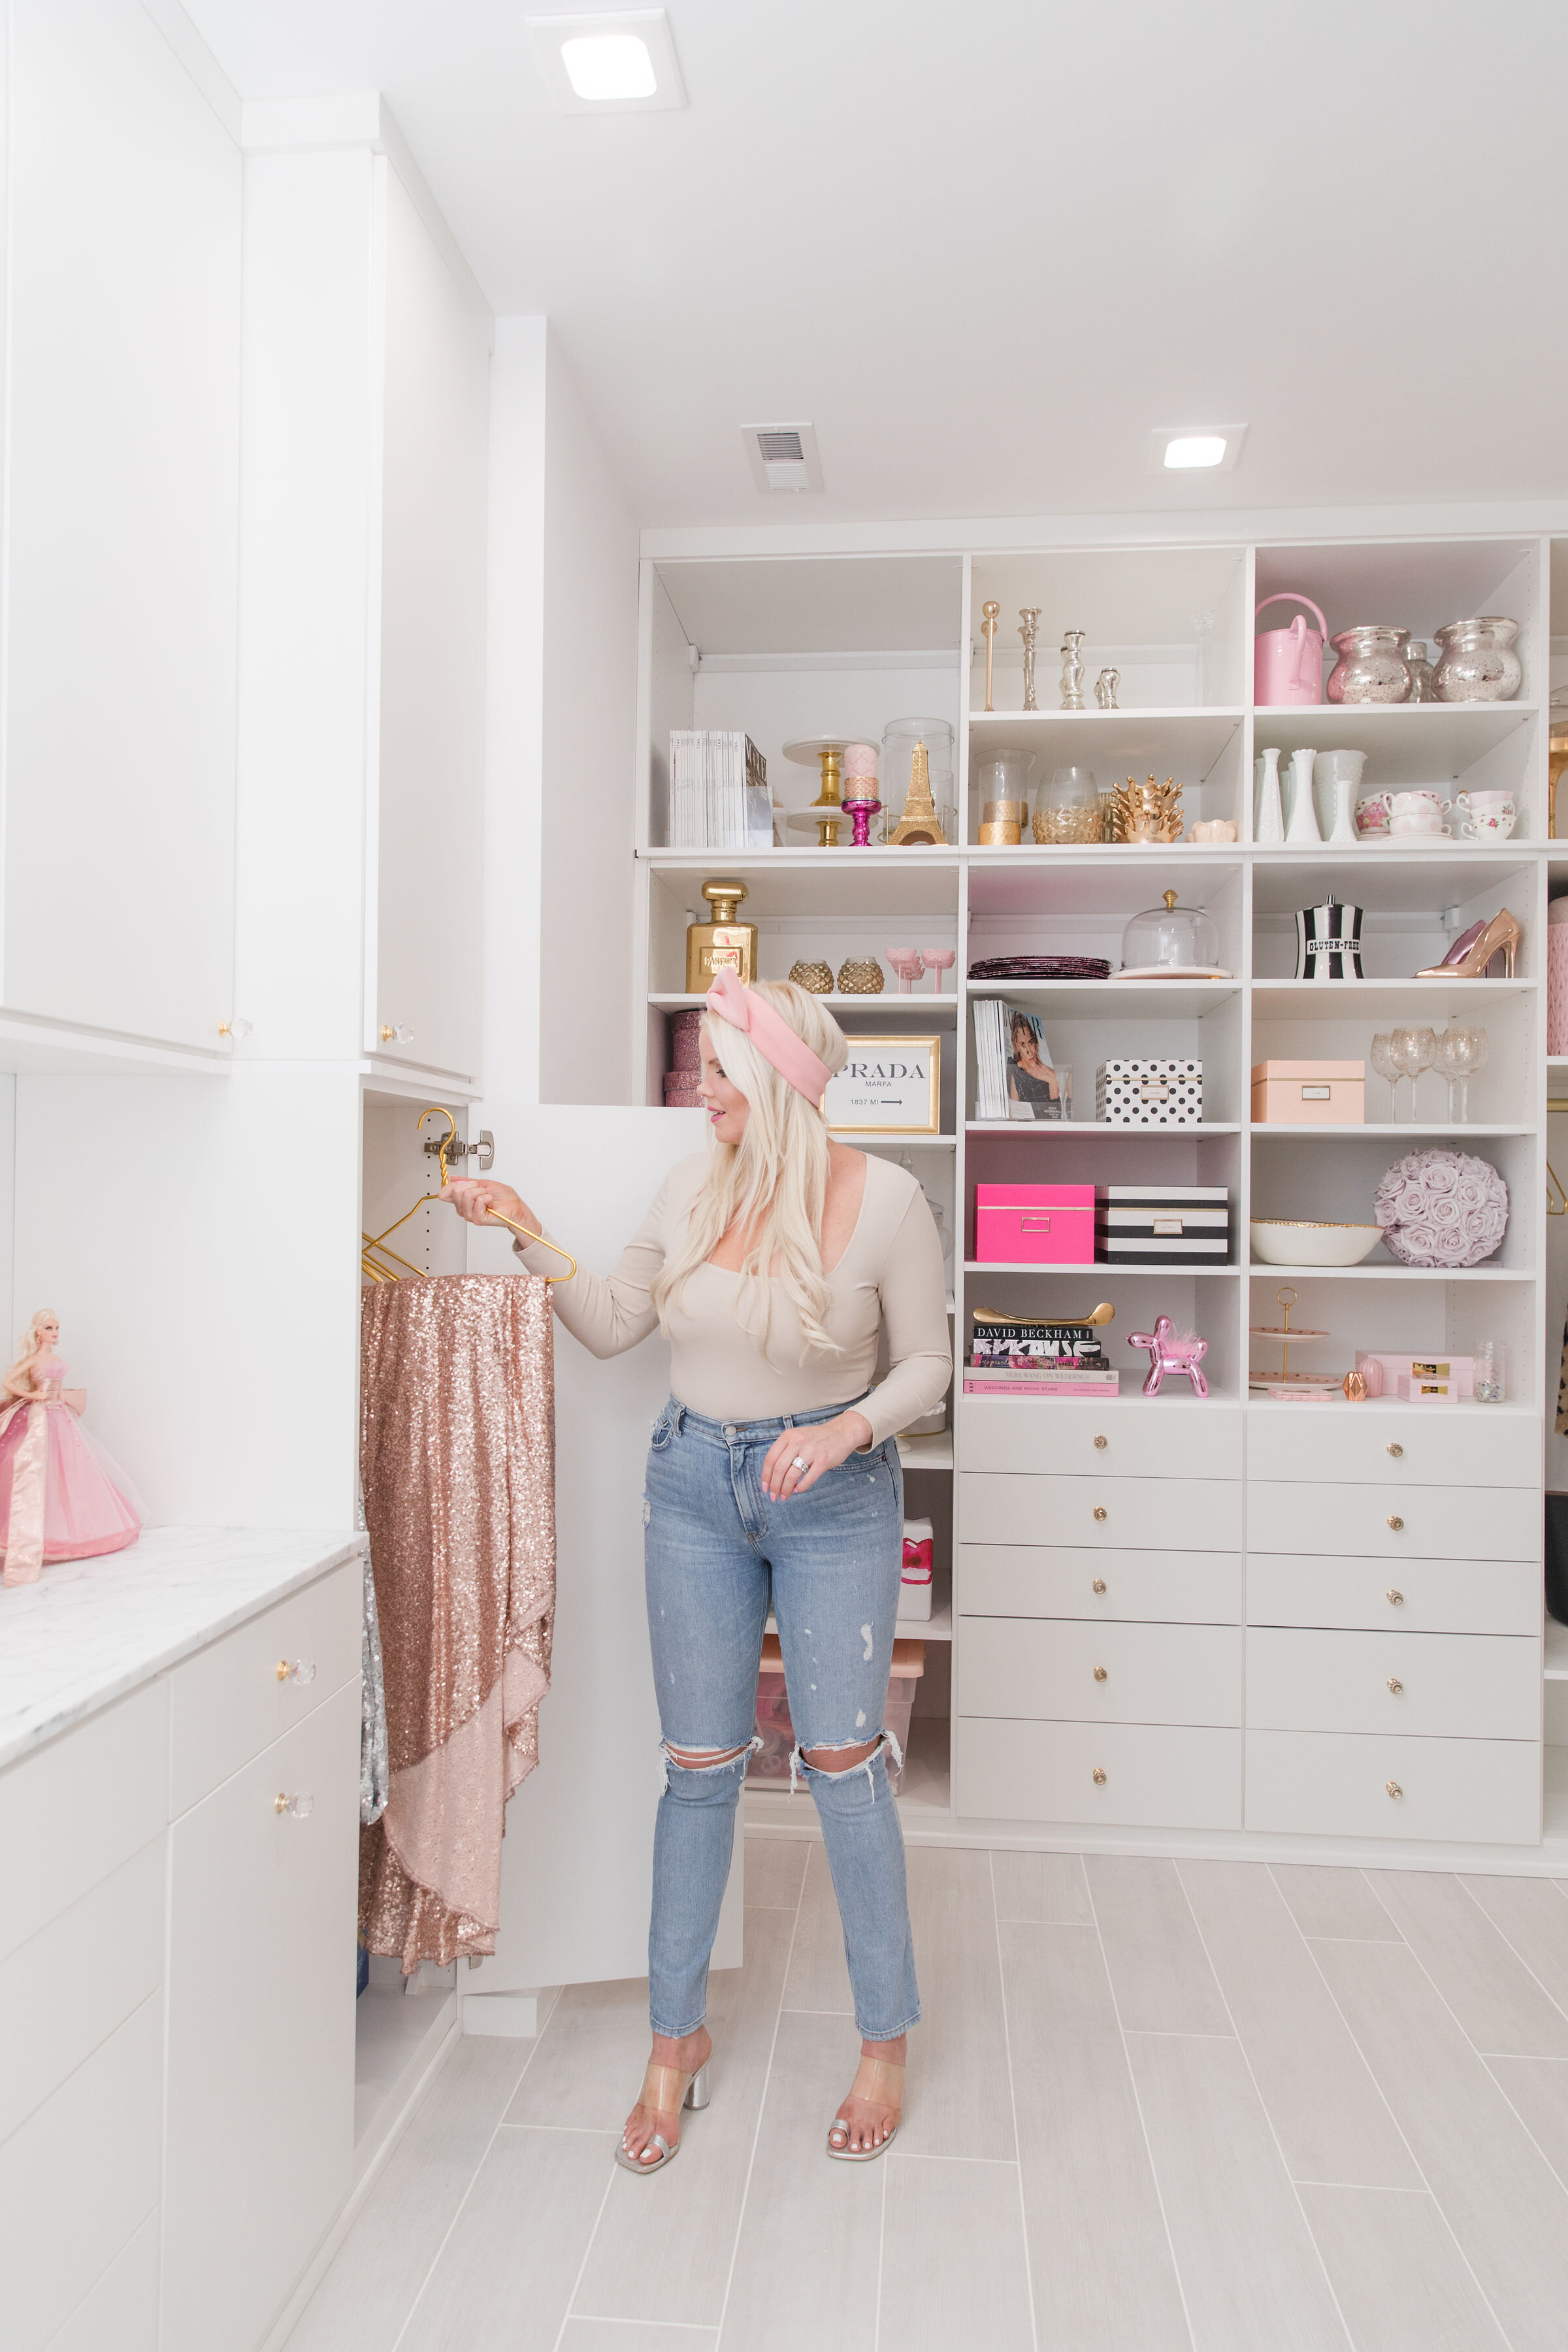 POSH-PR-The-Caroline-Doll-Barbie-Office-Pink-Style-Boss-Goals-At-Home-Workspace-Luxury-Fashion-Infused-Office-The-Doll-HQ-Organized-Storage-Room-Office-Goals-California-Closets-Custom-Cabinets-Acrylic-Crystal-Details-7.jpg